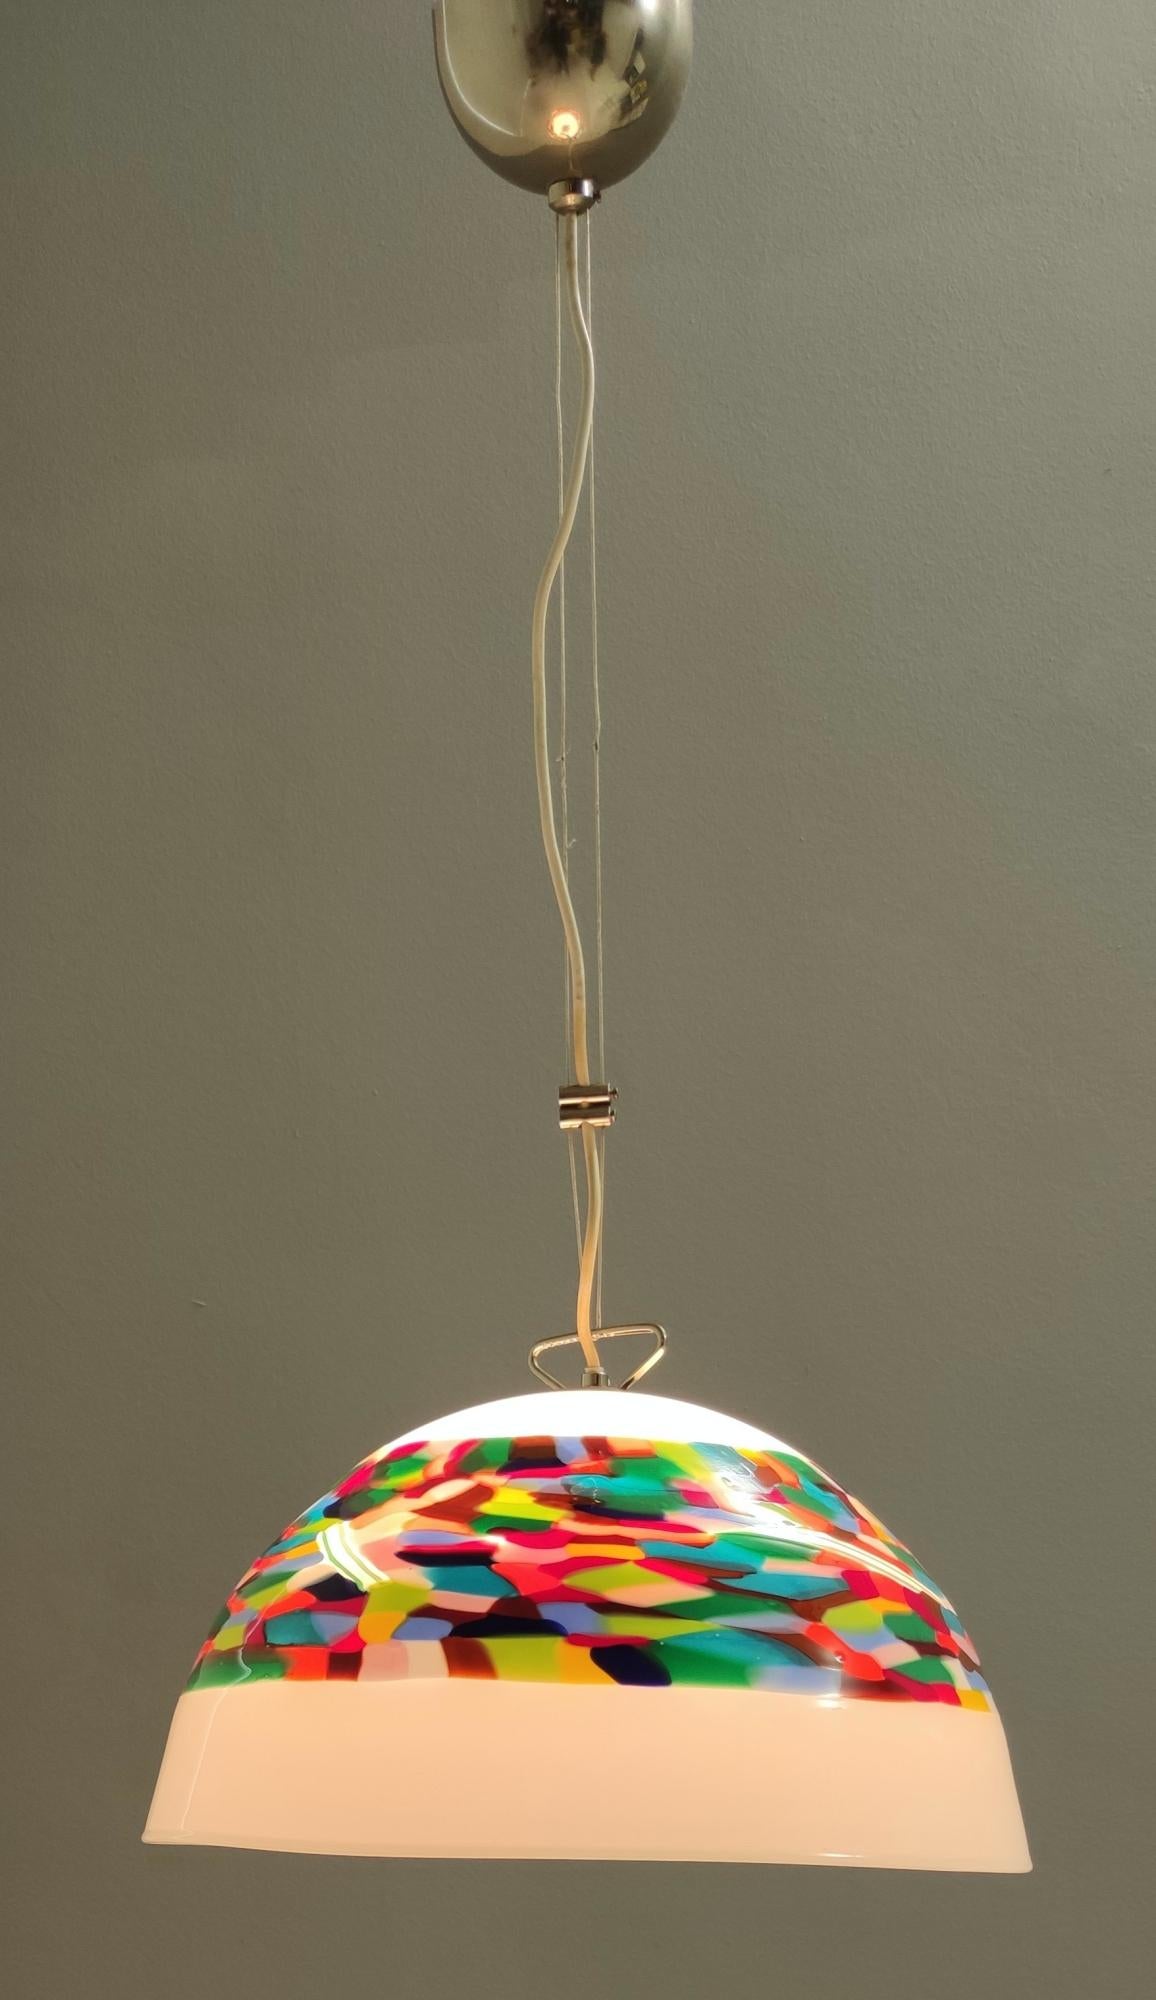 Made in Italy, 1980s.
Made in blown glass. 
Its height is adjustable.
This pendant is marked 